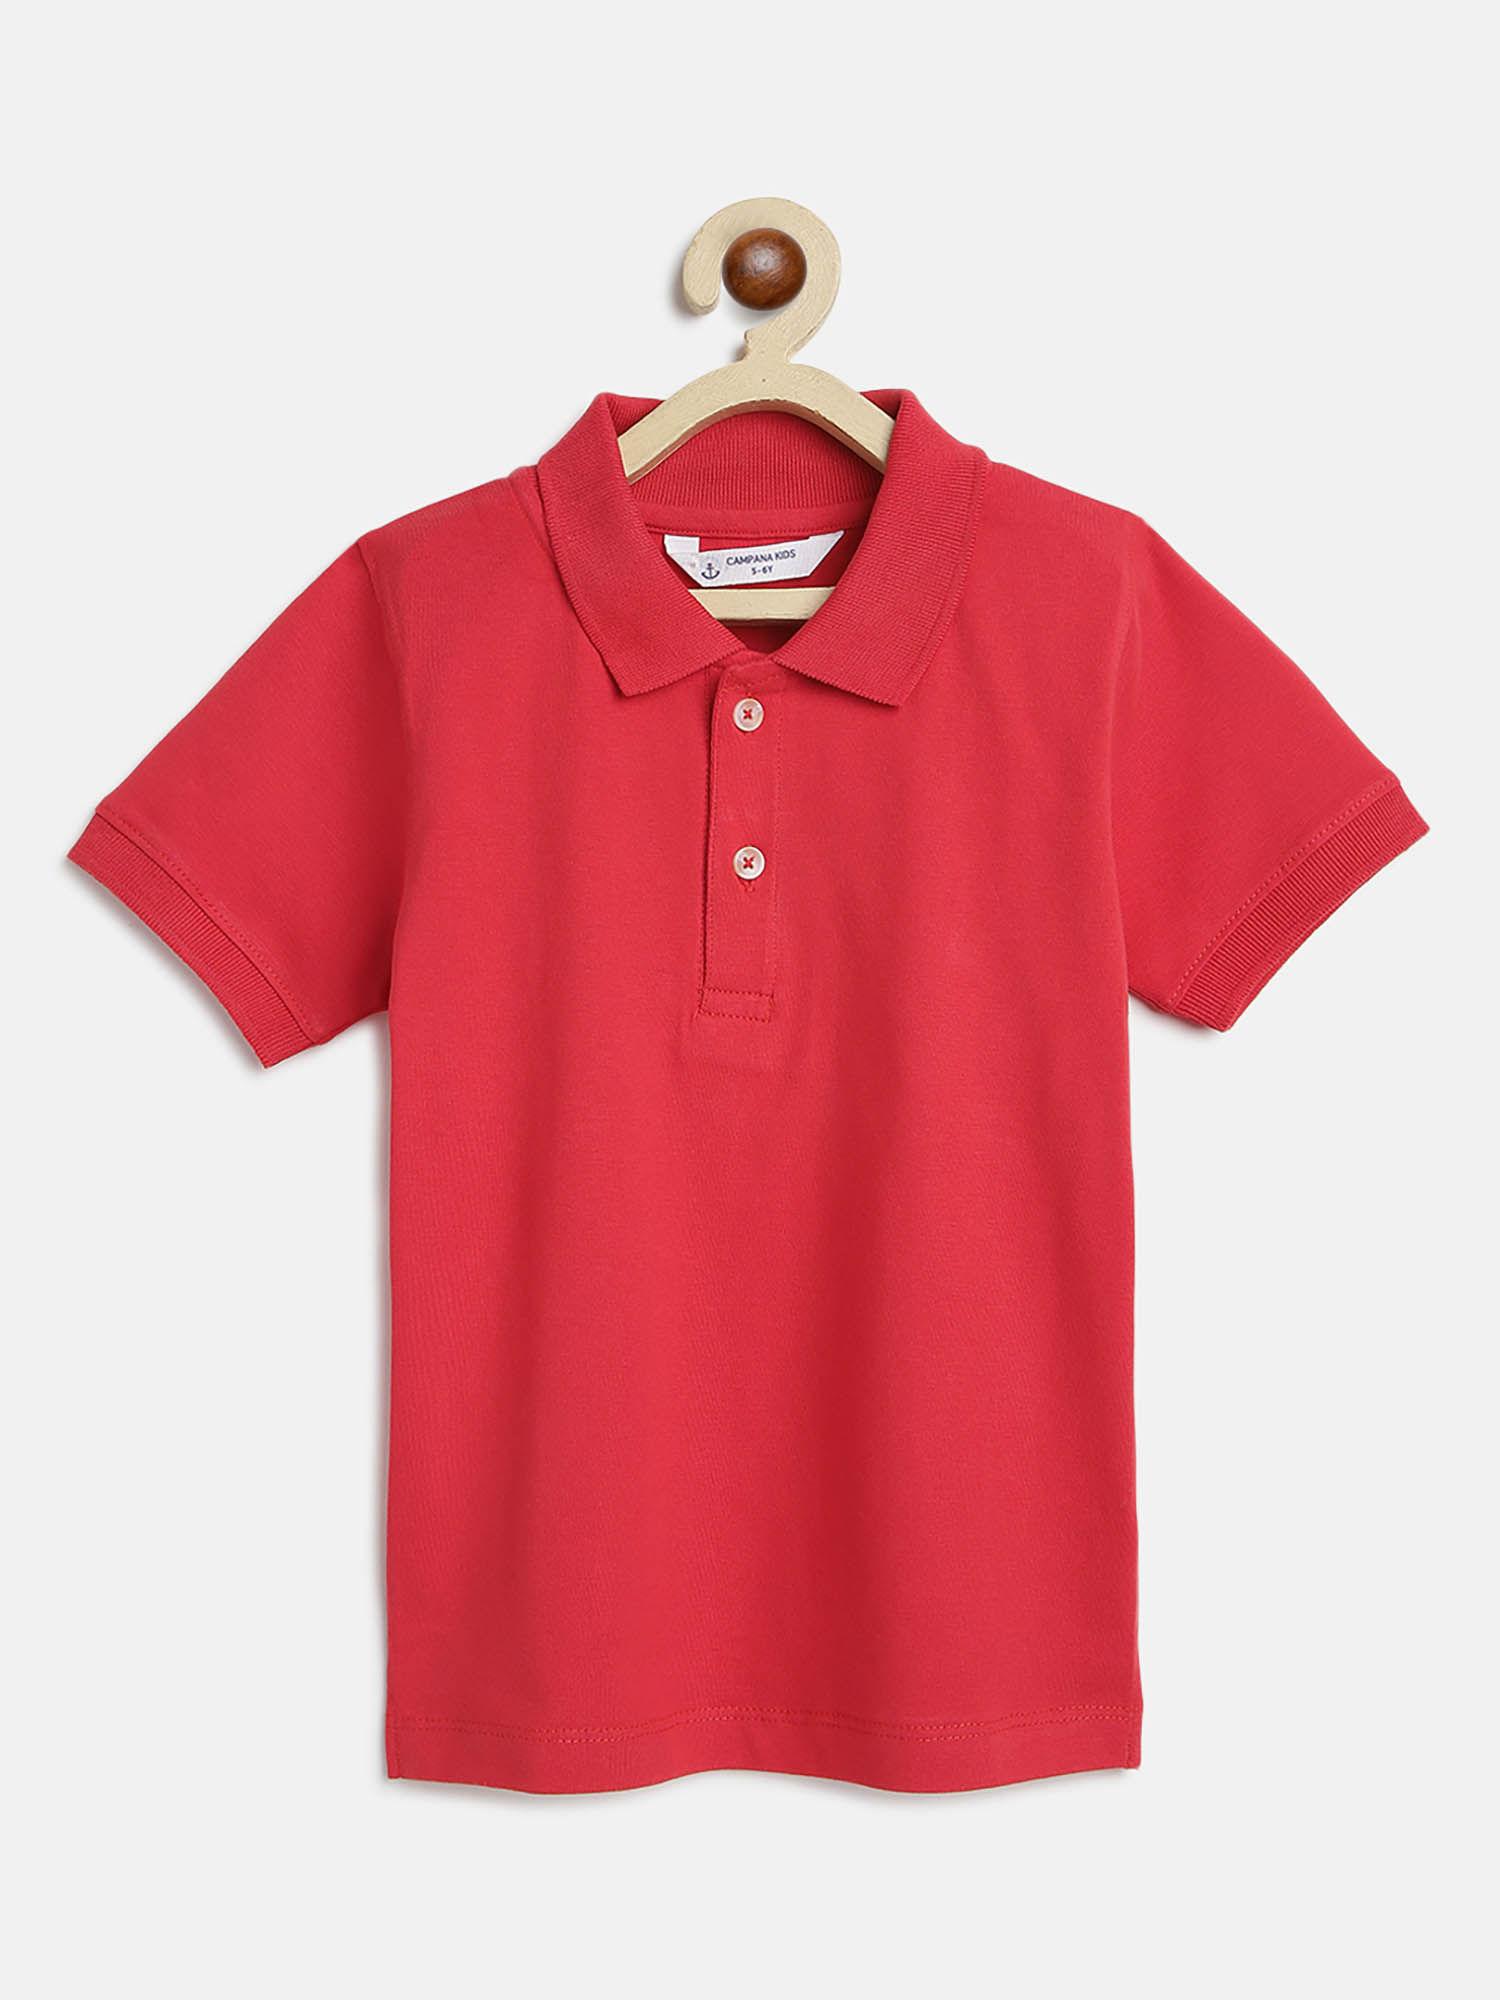 boys niko jersey half sleeves solid polo t-shirt red